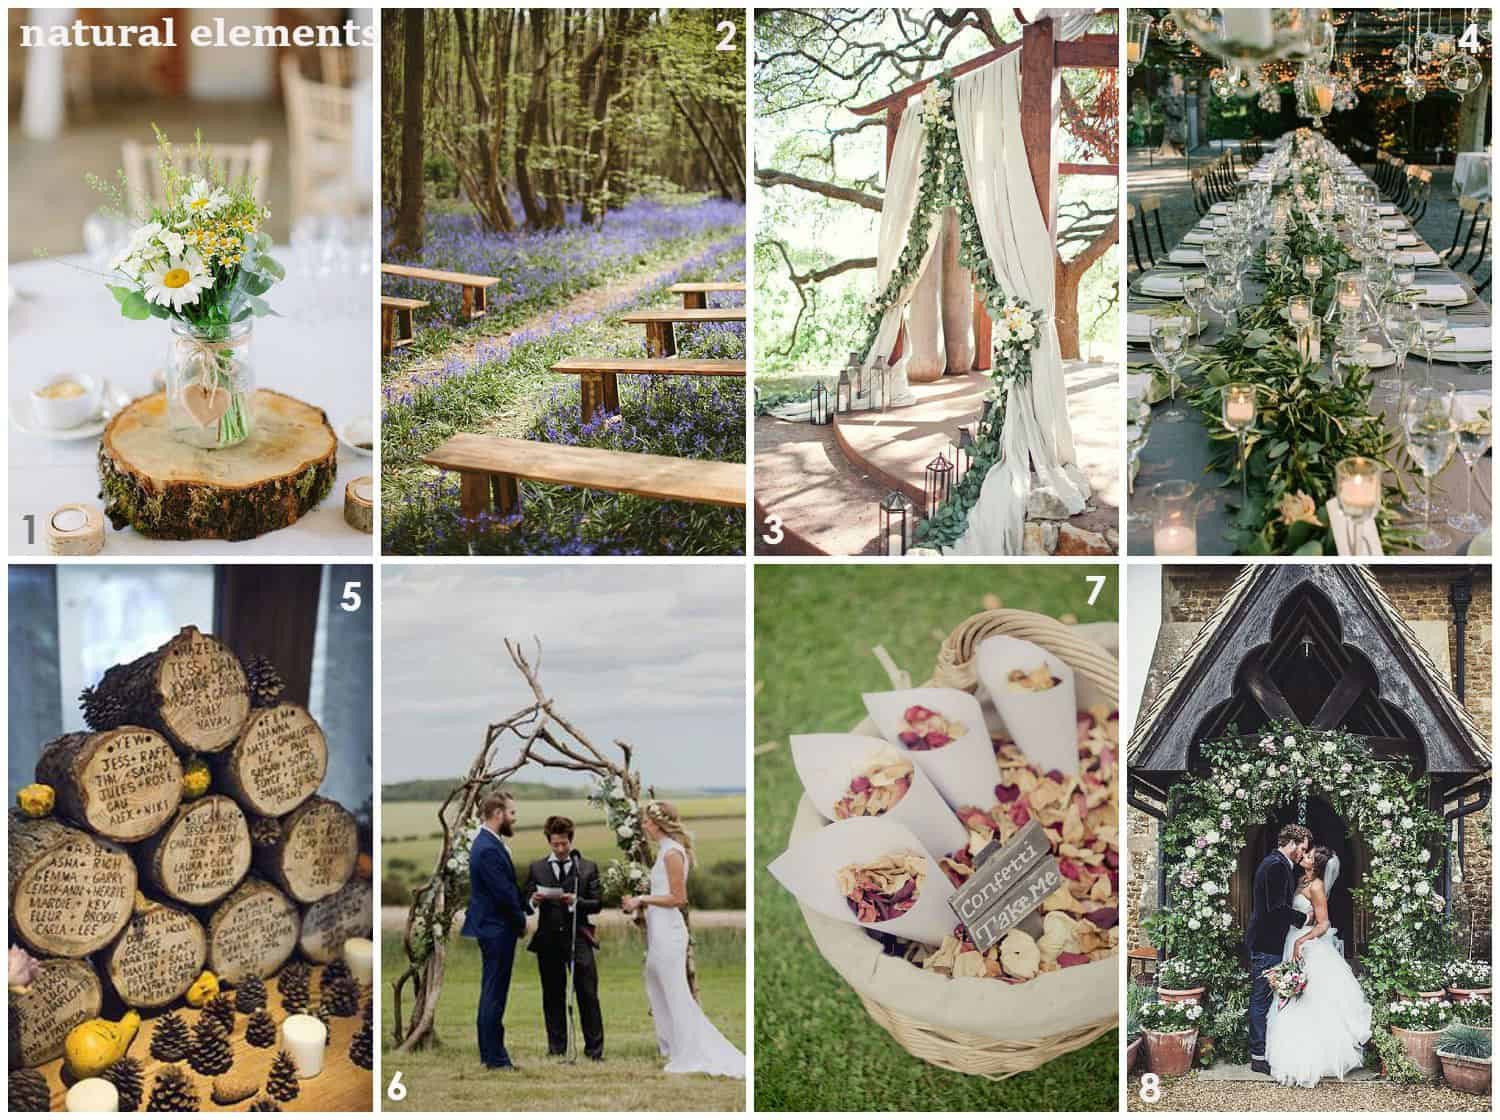 2019 wedding trends, natural elements, floral, stone, shell, wood, nature